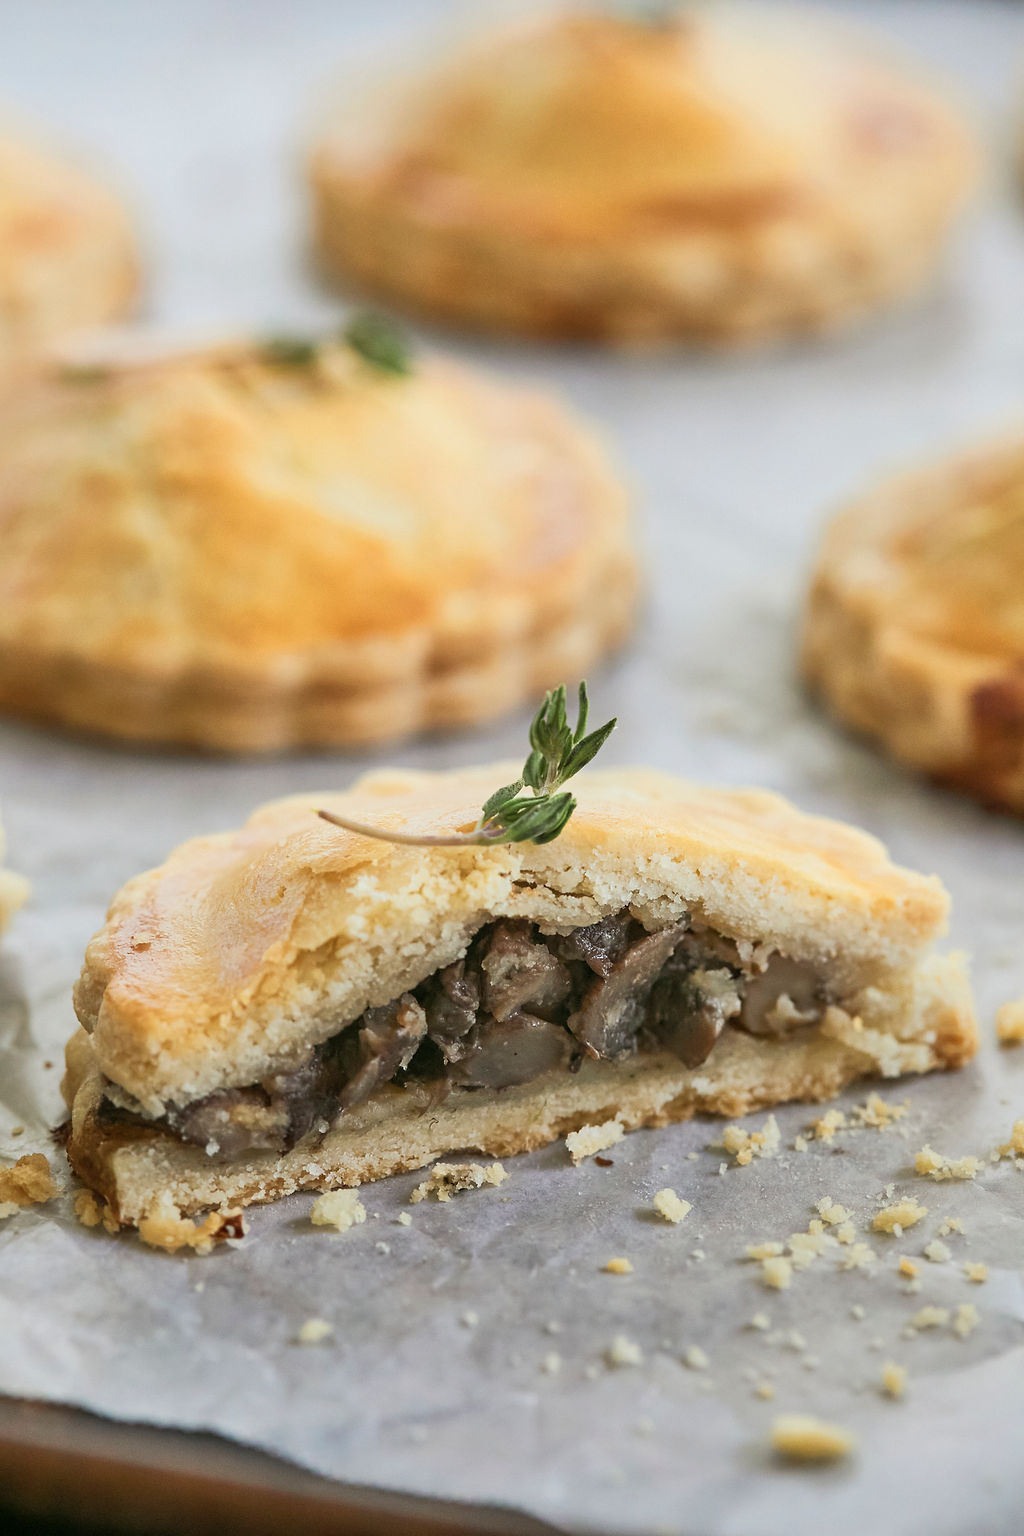 A cross section of my Mushroom, Thyme, and Mascarpone Hand Pies to show filling and texutre.